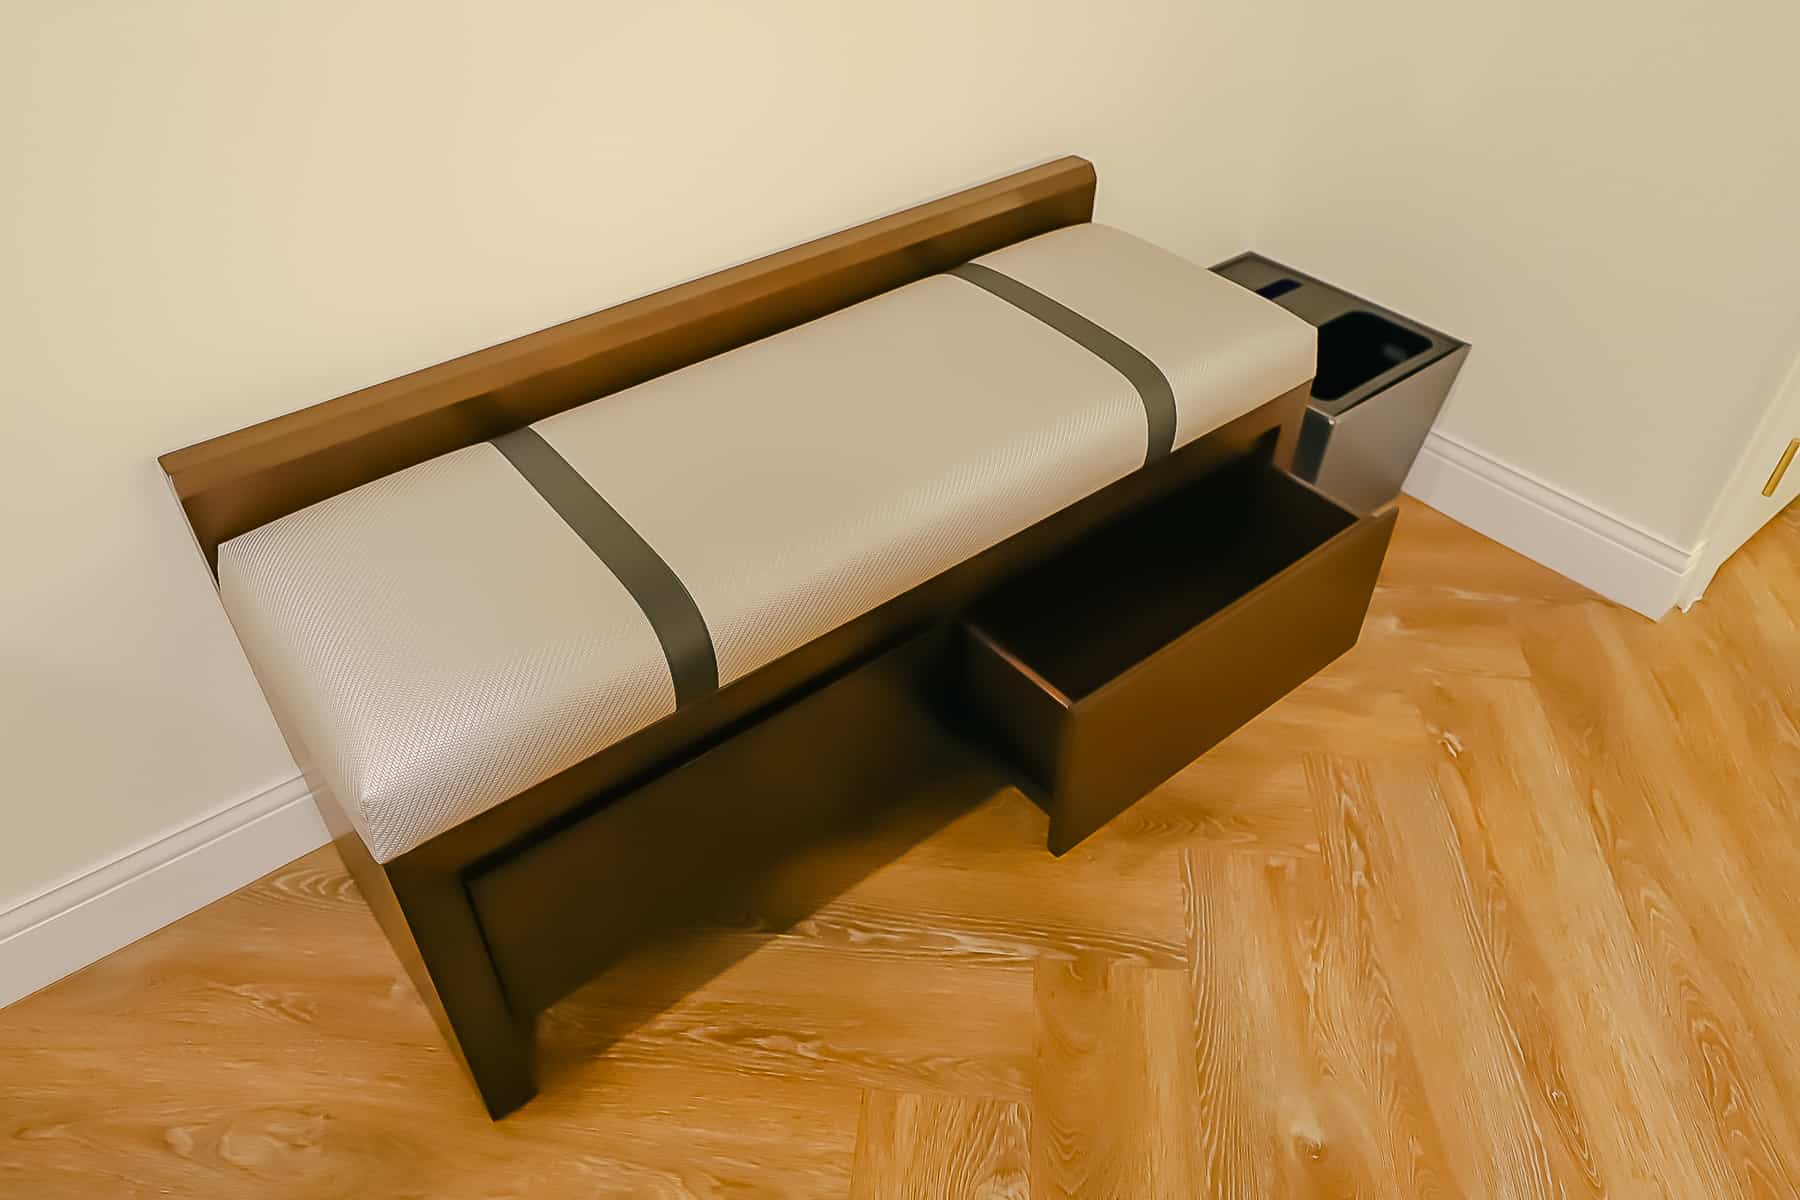 bench with rooms for shoes underneath